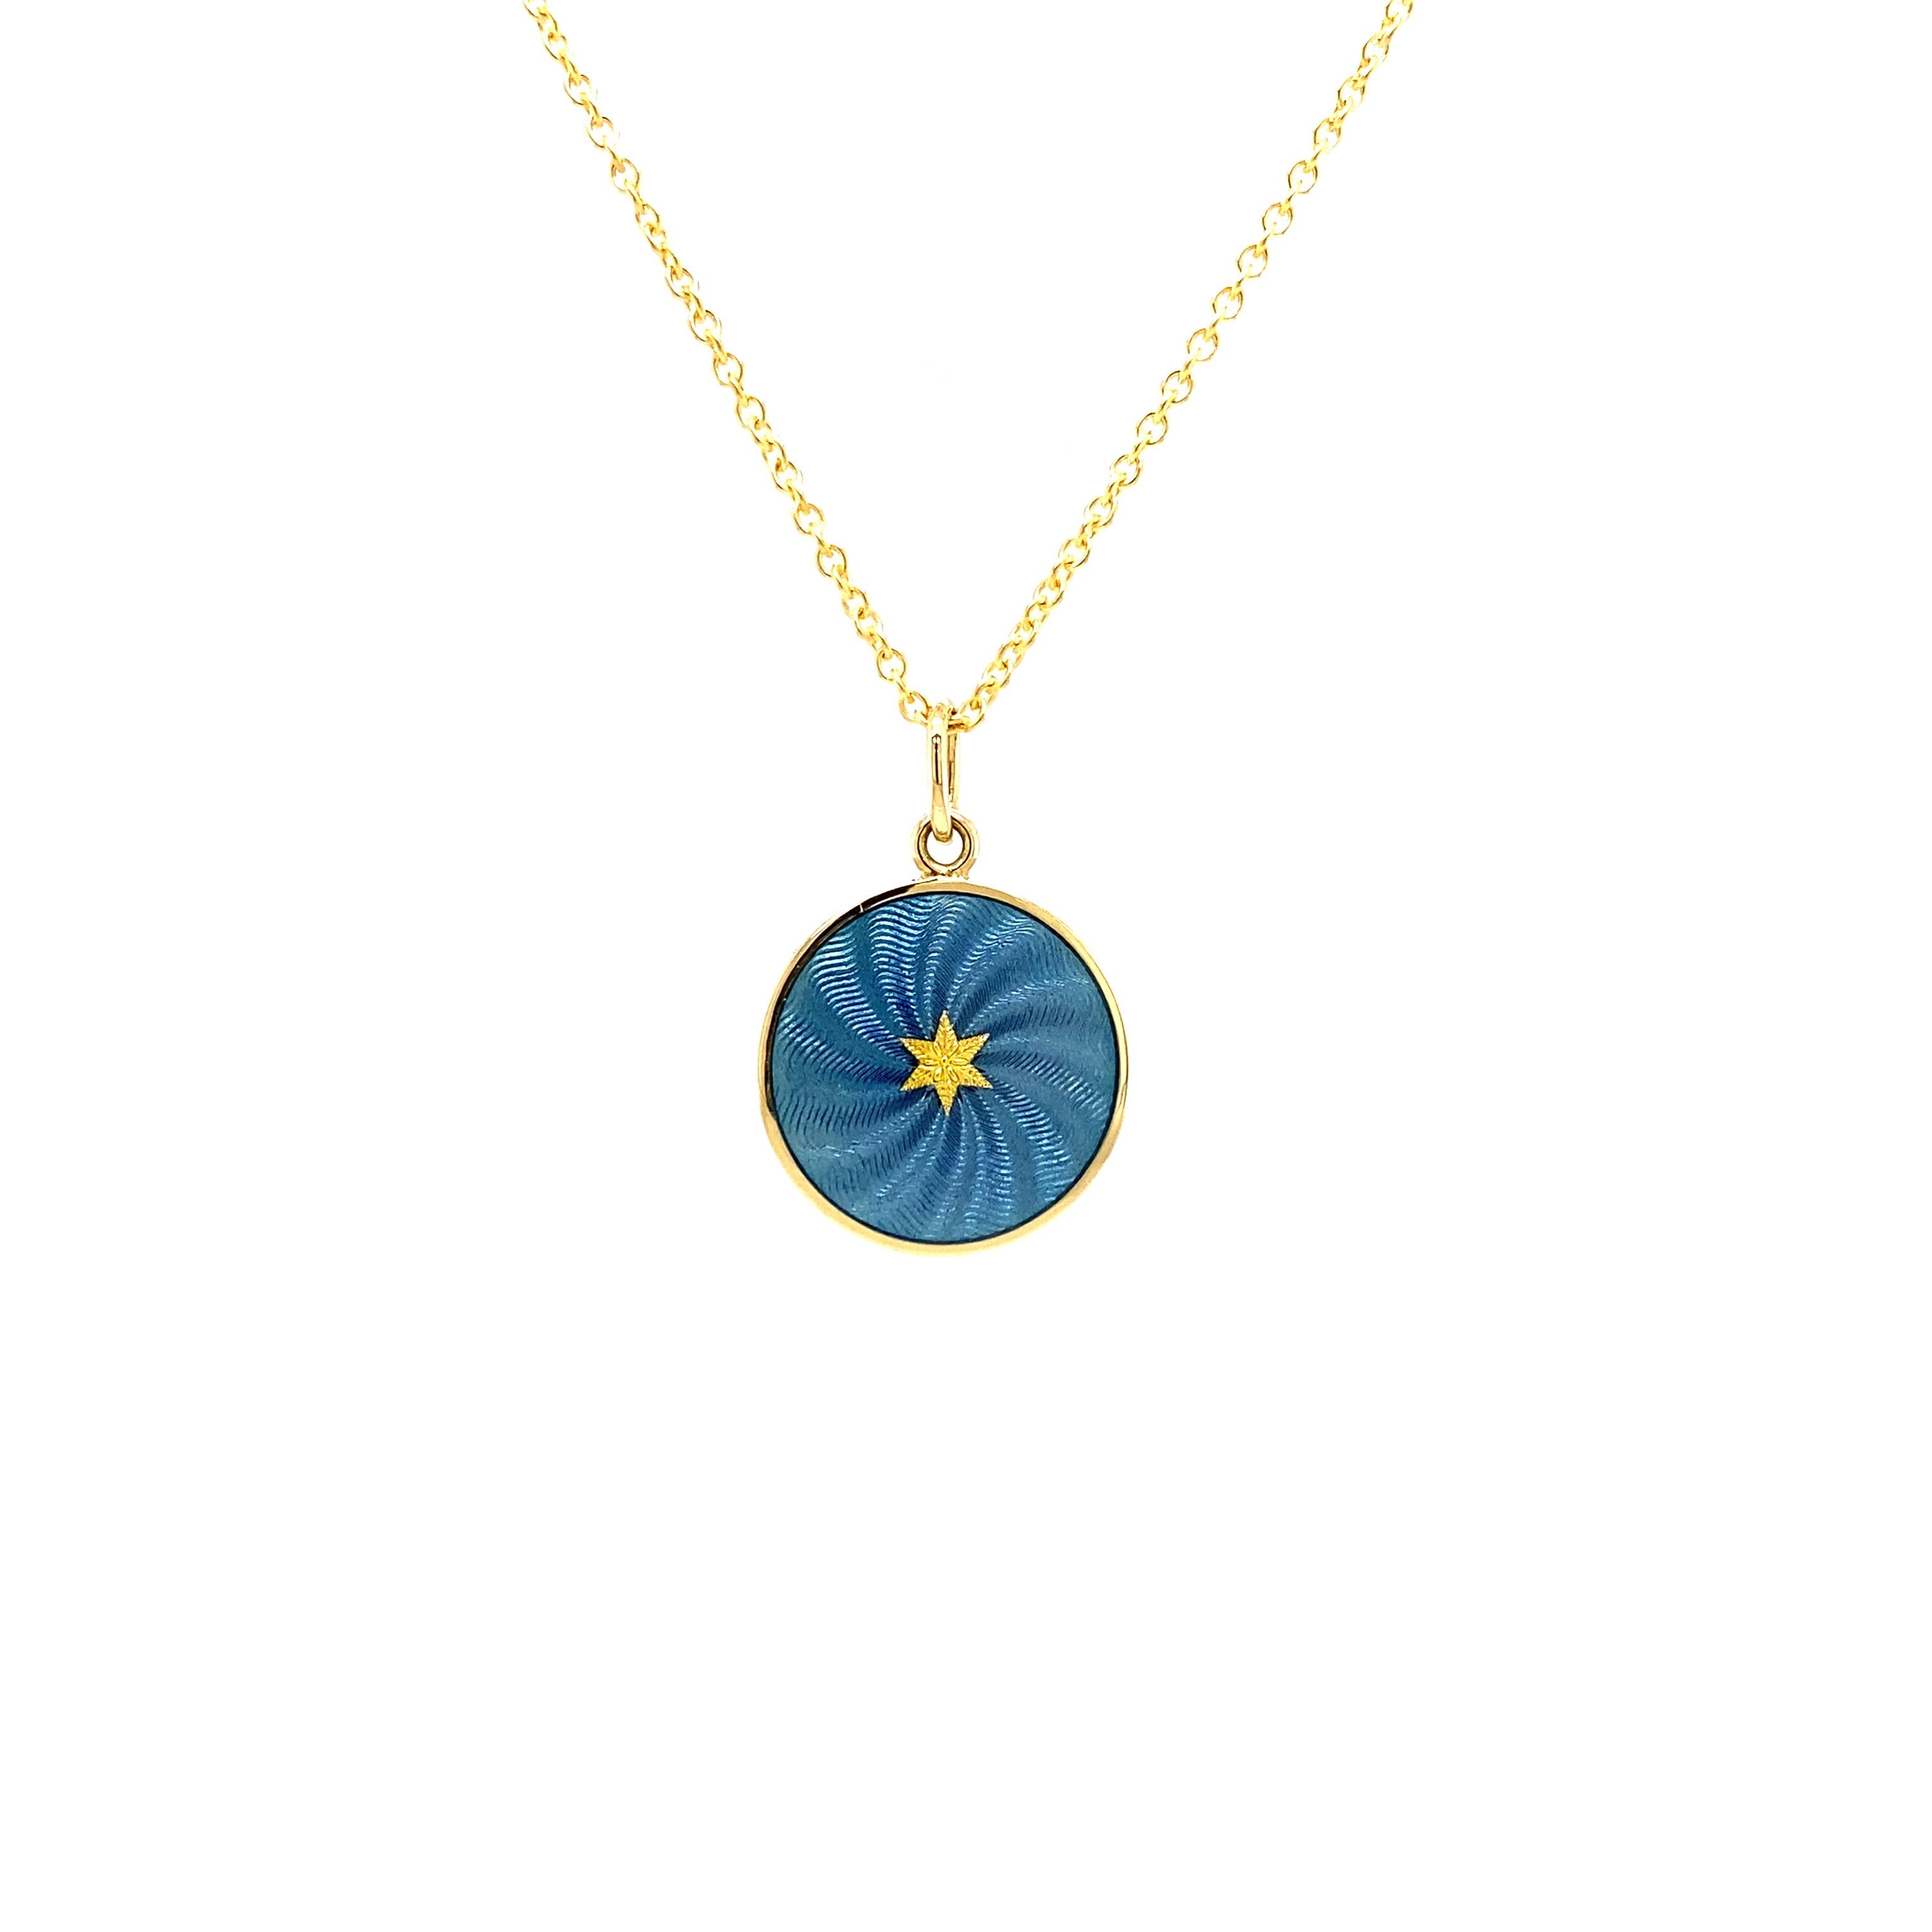 Victorian Round Disk Pendant 18k Yellow Gold - Blue Enamel Guilloche Paillons For Sale